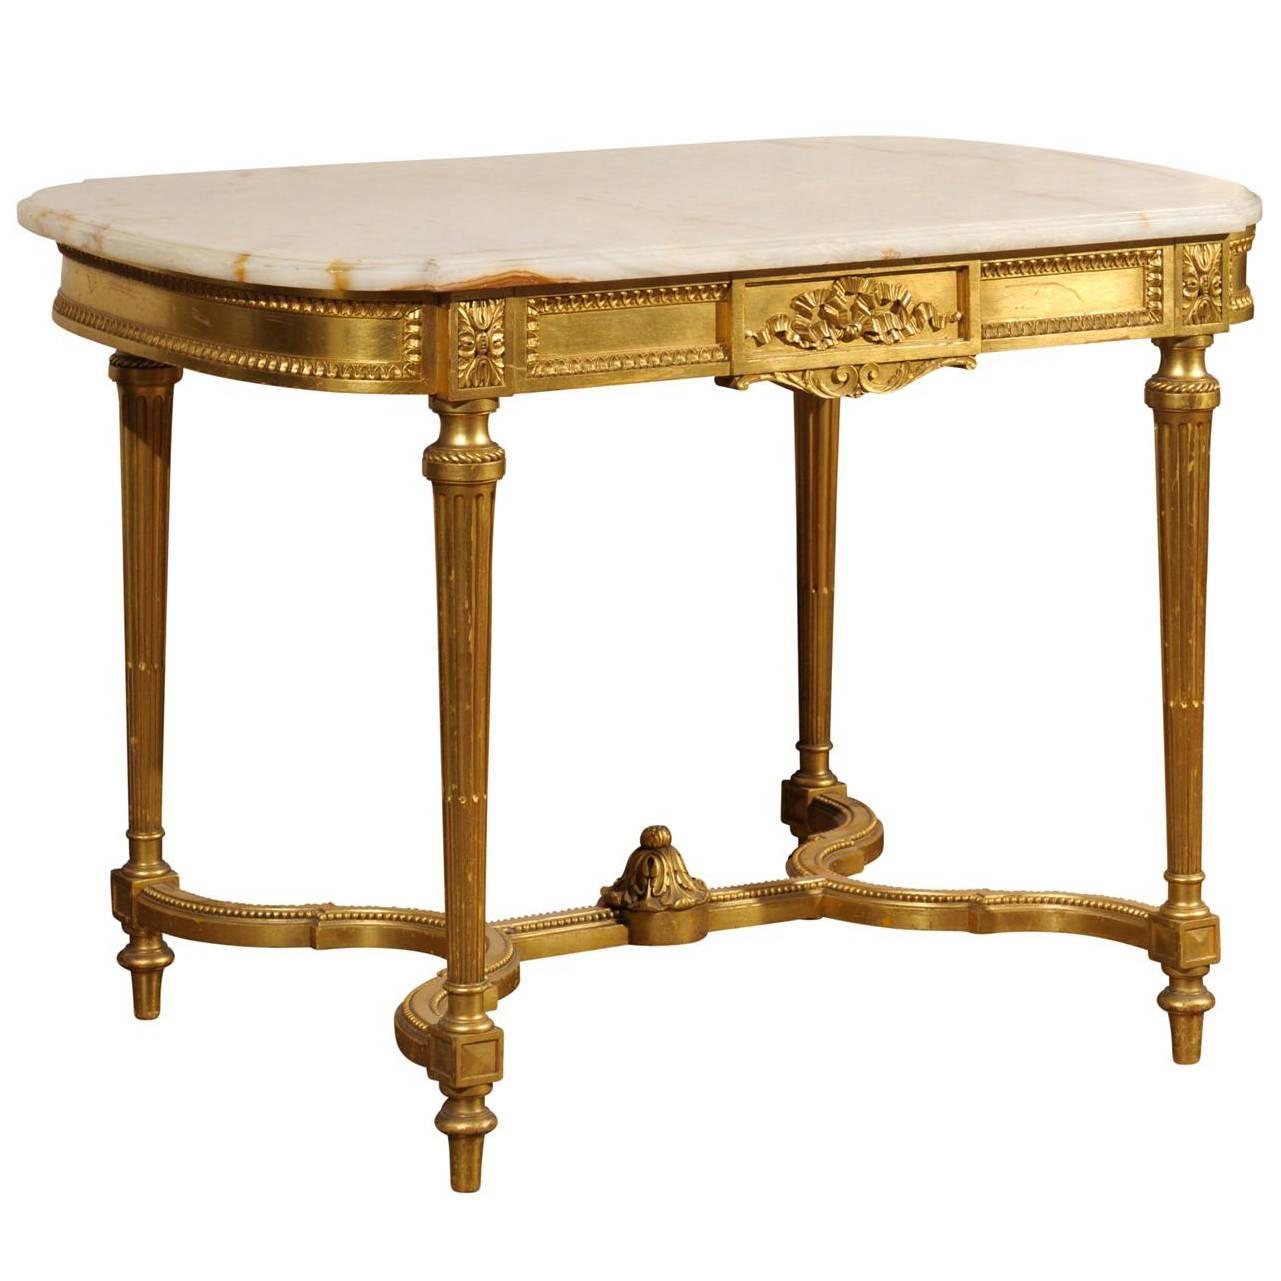 French 19th Century Louis XVI Style Onyx Top and Giltwood Center Table